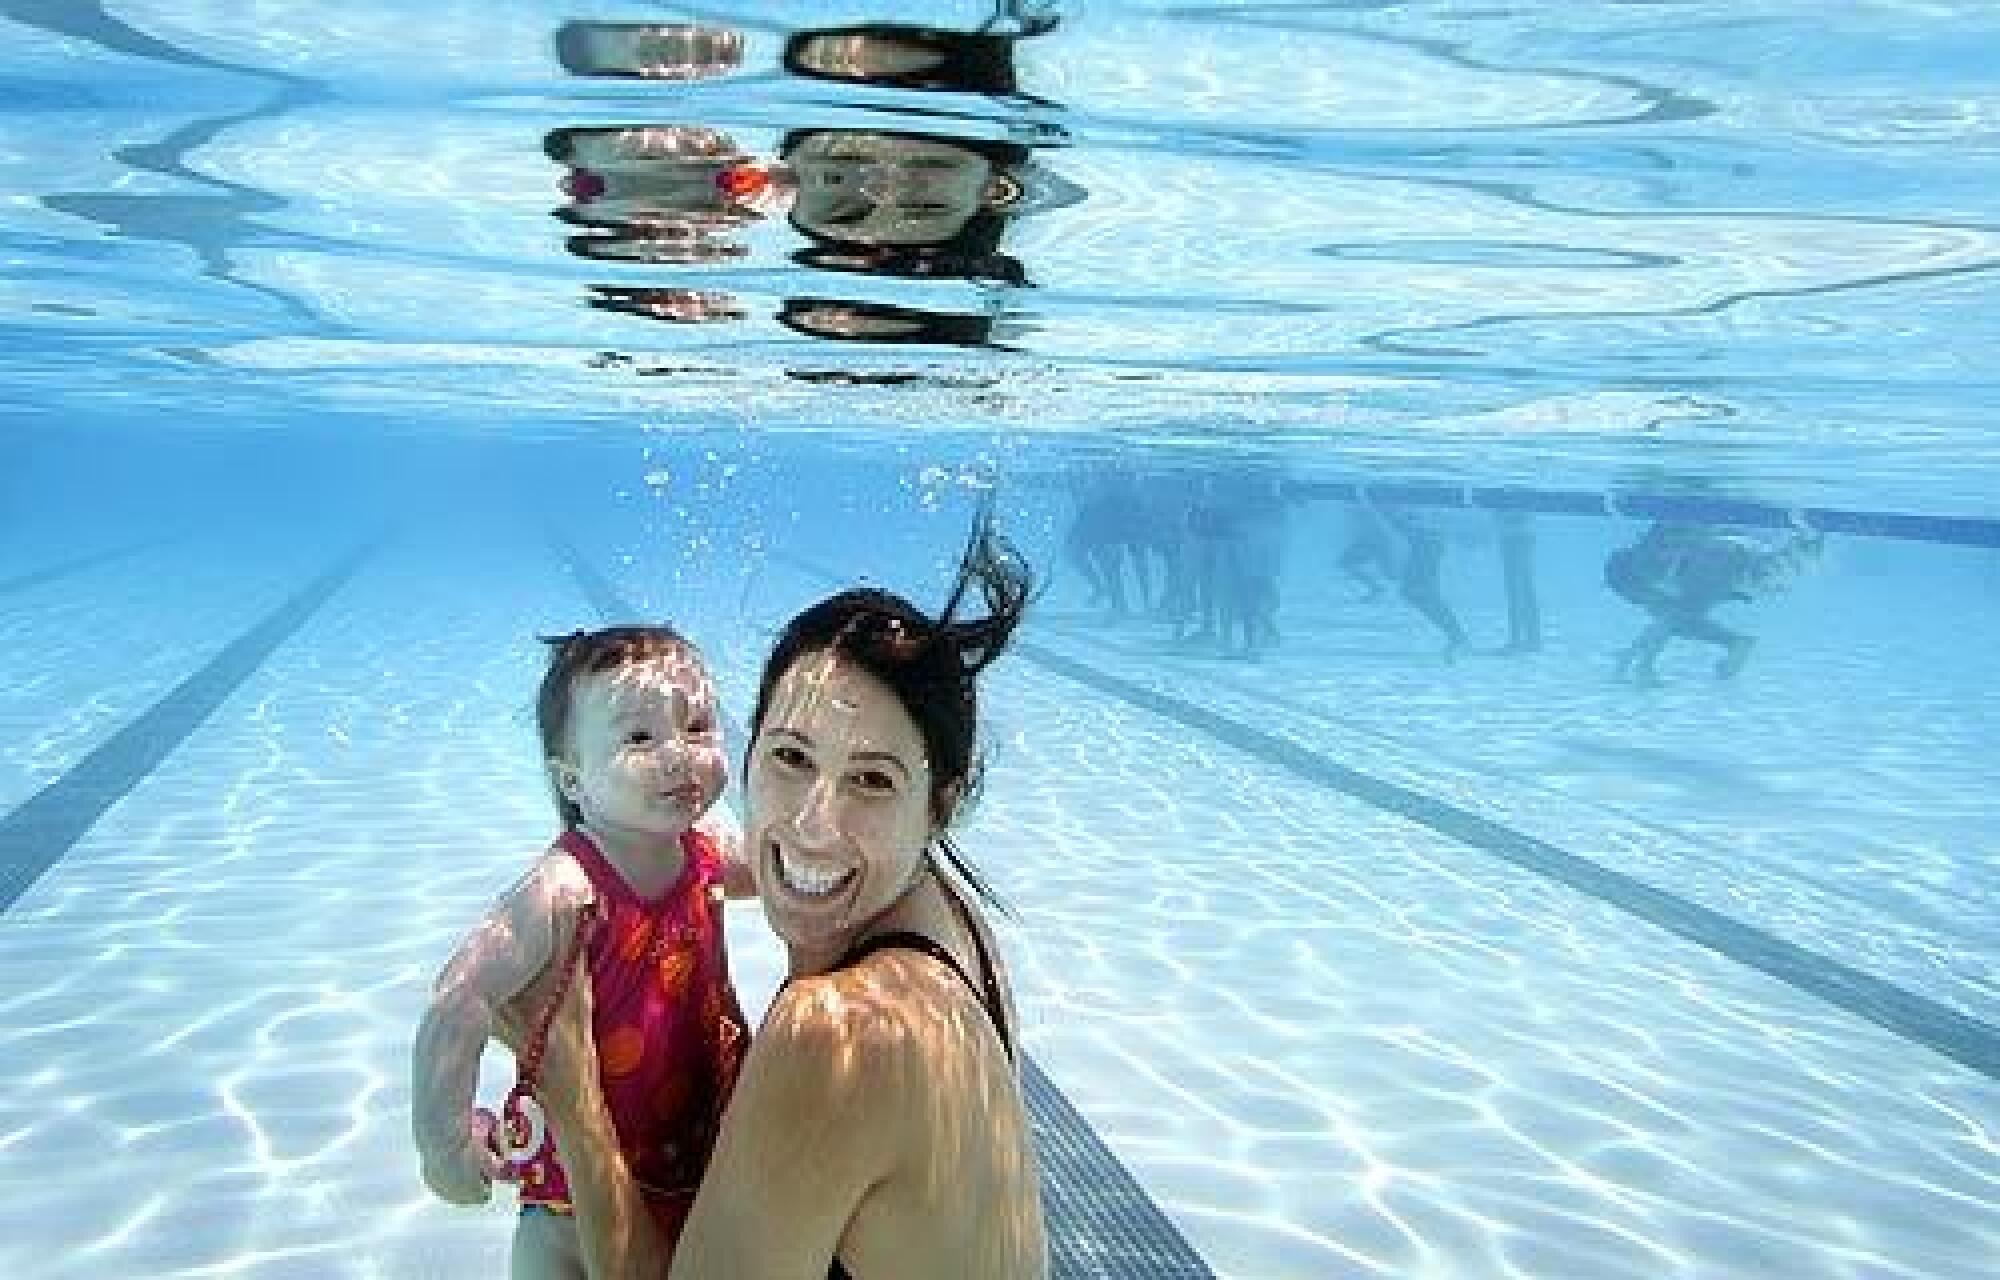 Janet Evans and her 8-month-old daughter, Sydney, take a dip into the John C. Argue pool at Exposition Park to kick off the LA84 Learn-to-Swim Program on the first day of summer. The program aims to teach kids to swim and foster love of water and reduce drownings.